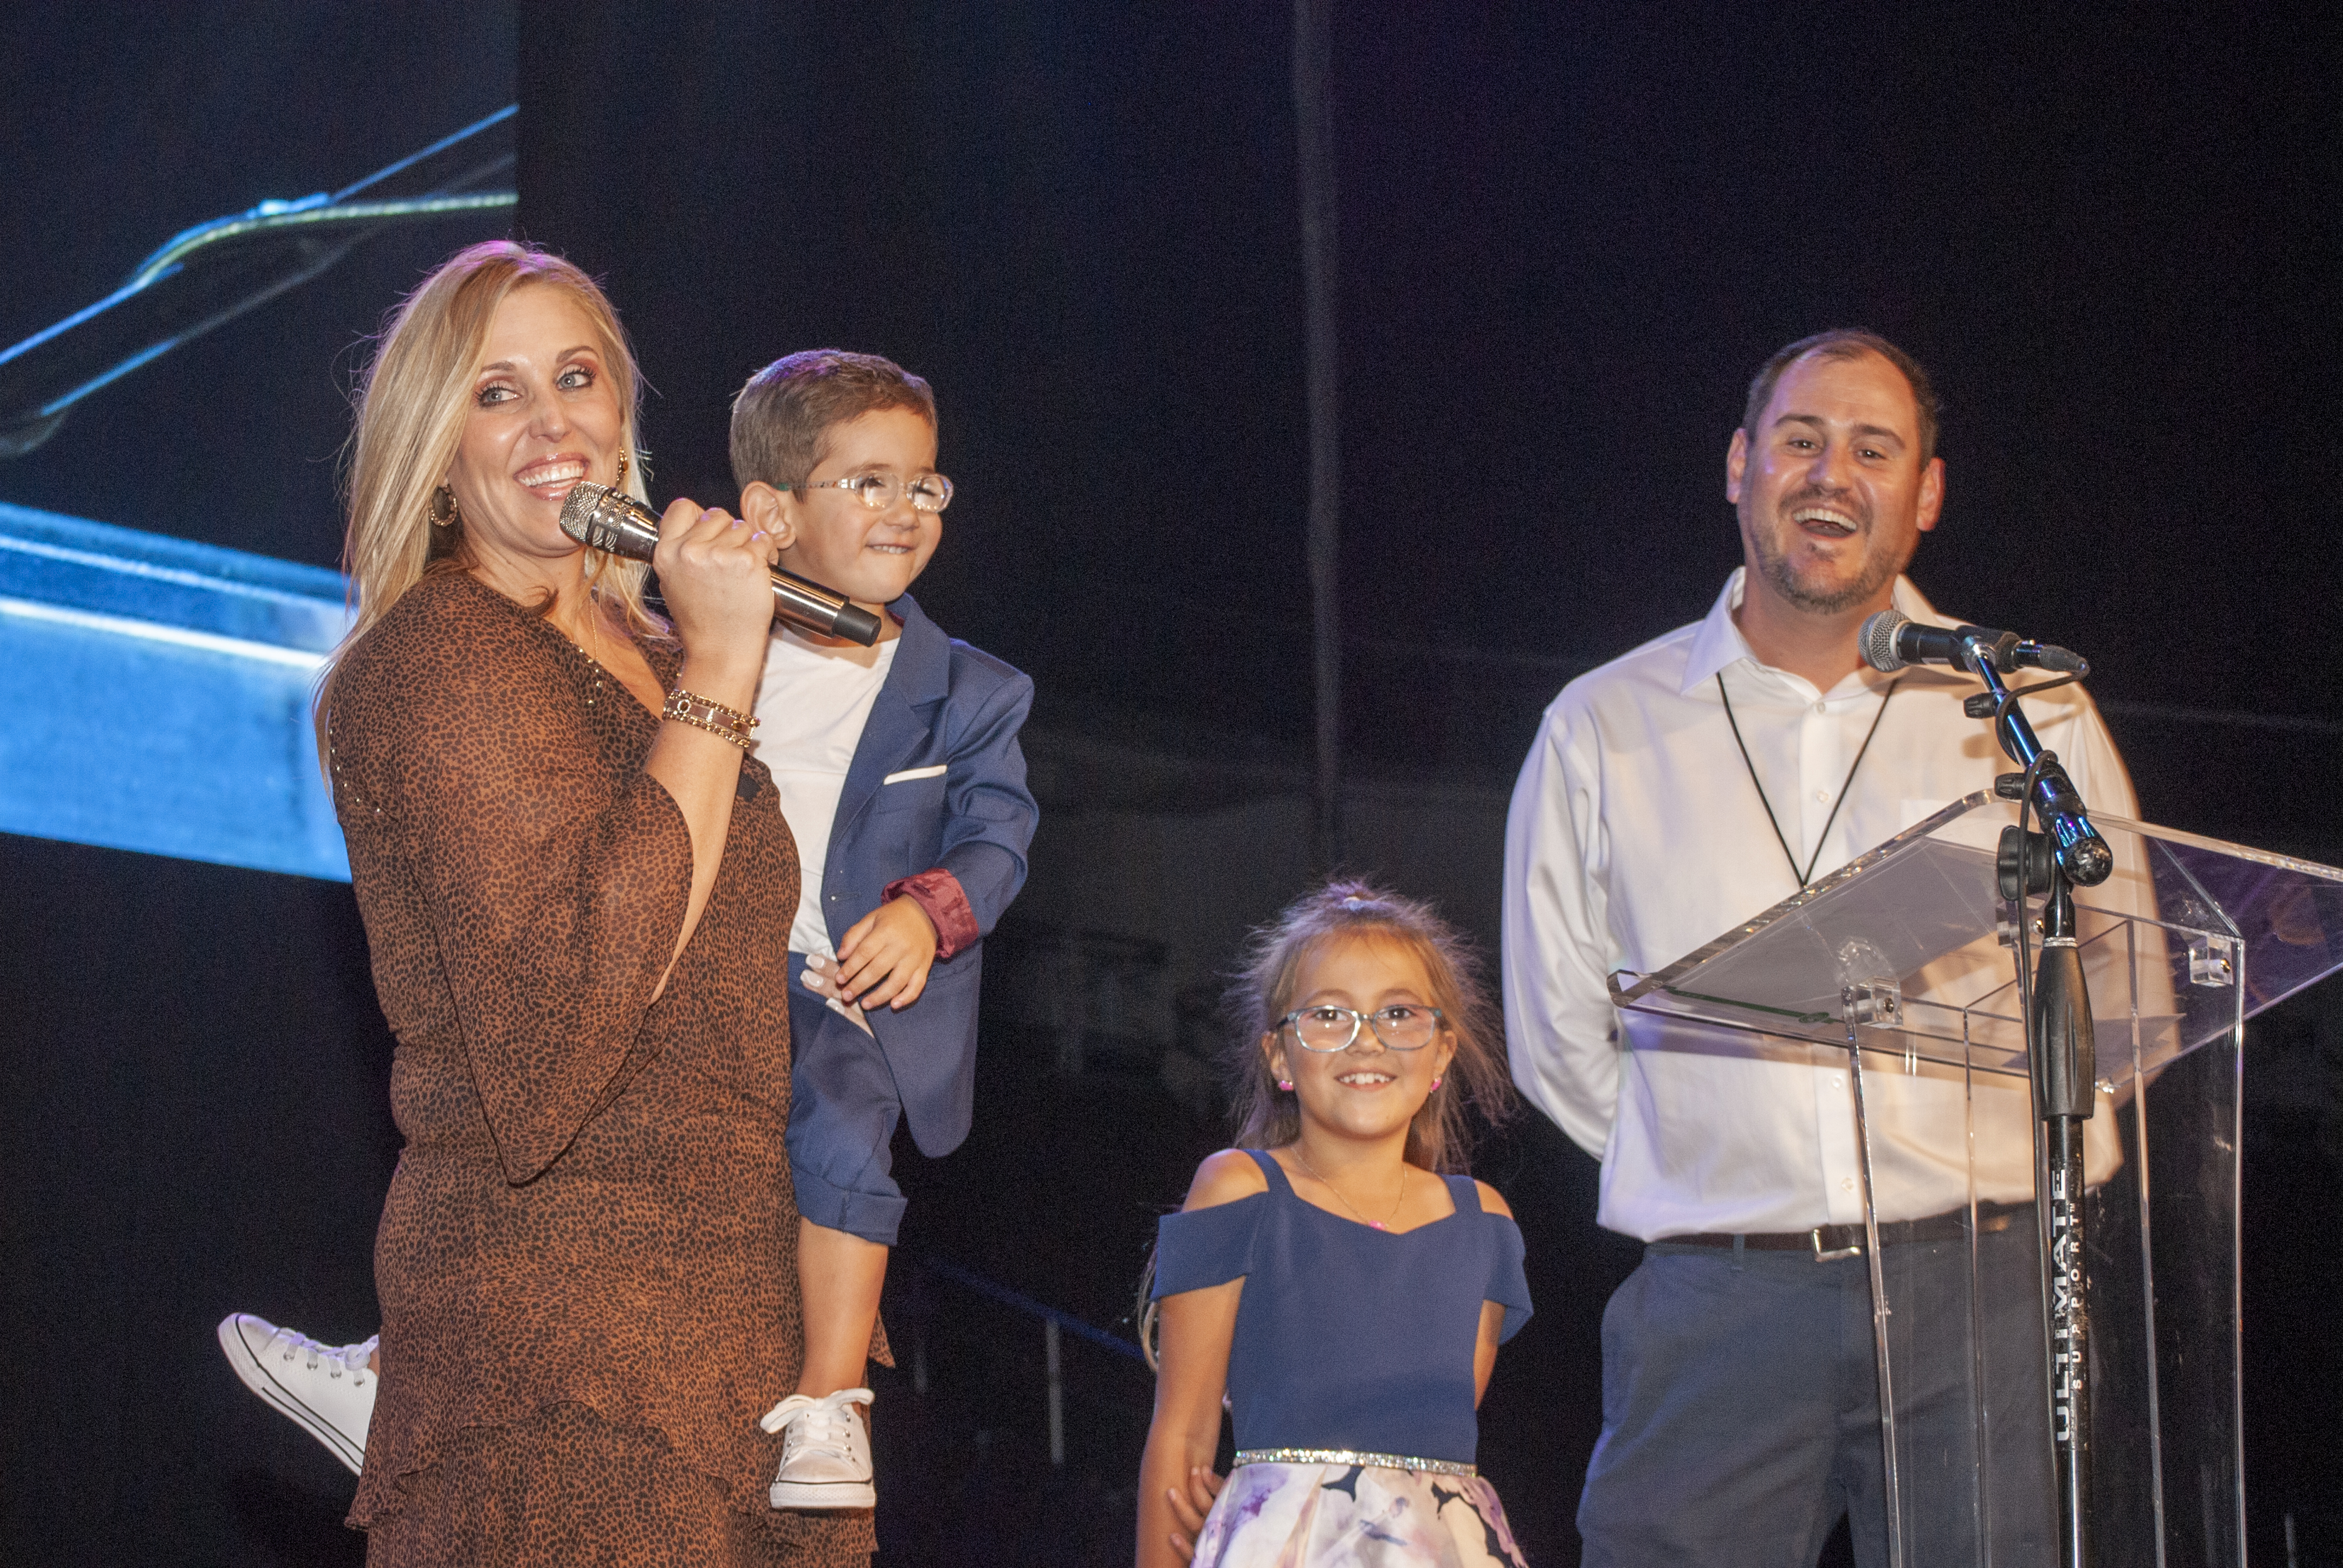 Carter and family on stage during the gala